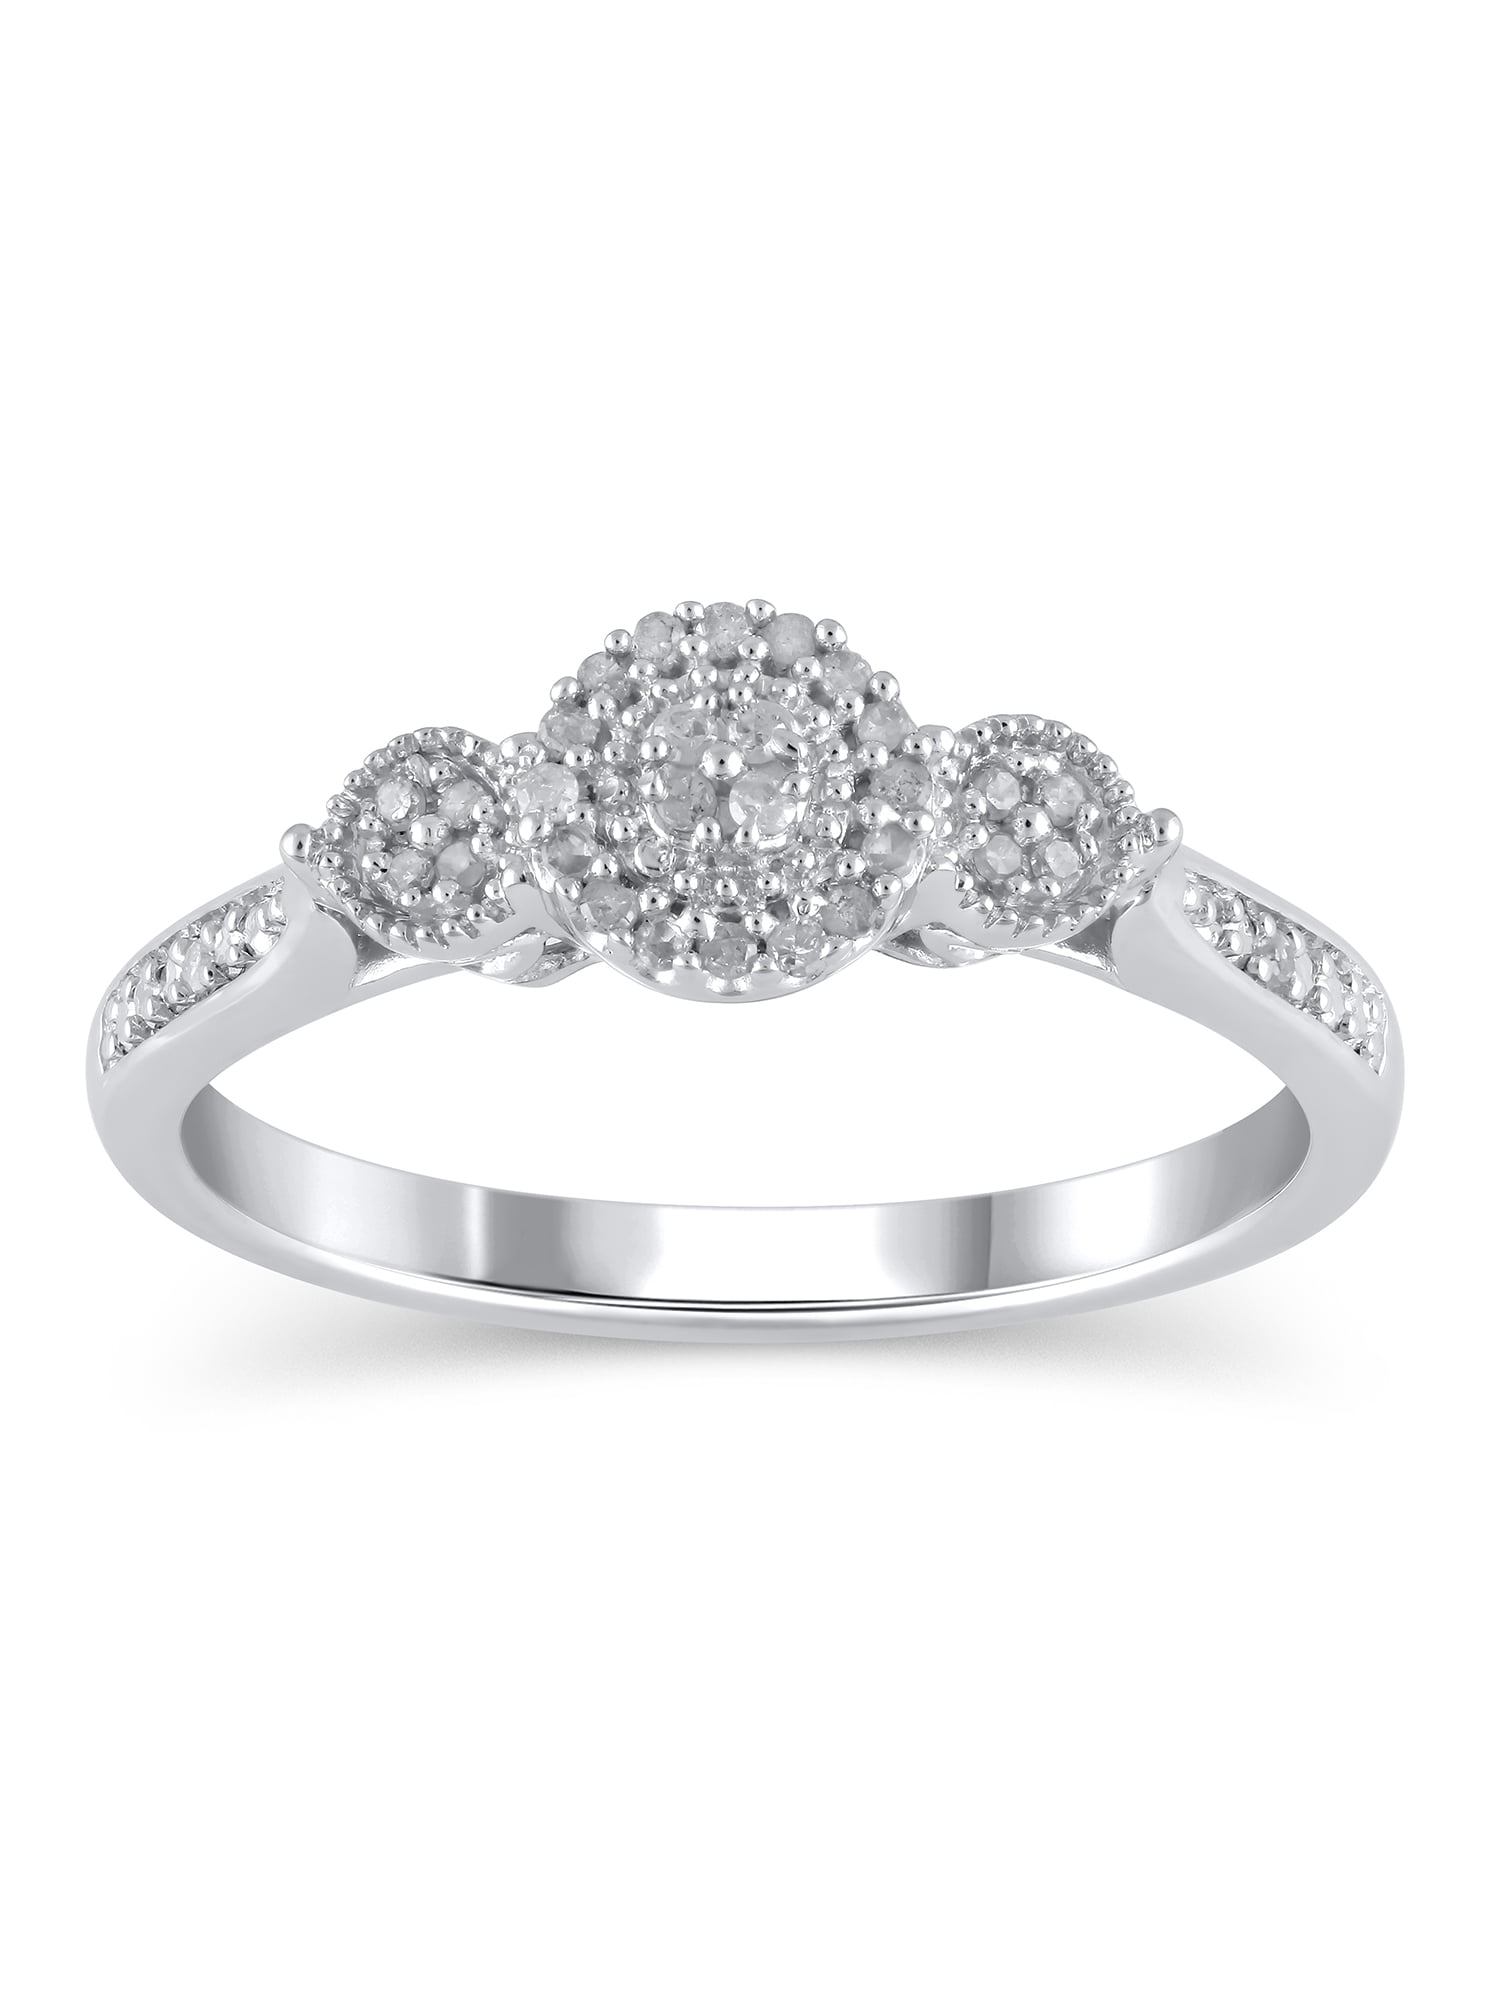 Promise Rings in The Wedding Ring Shop - Walmart.com